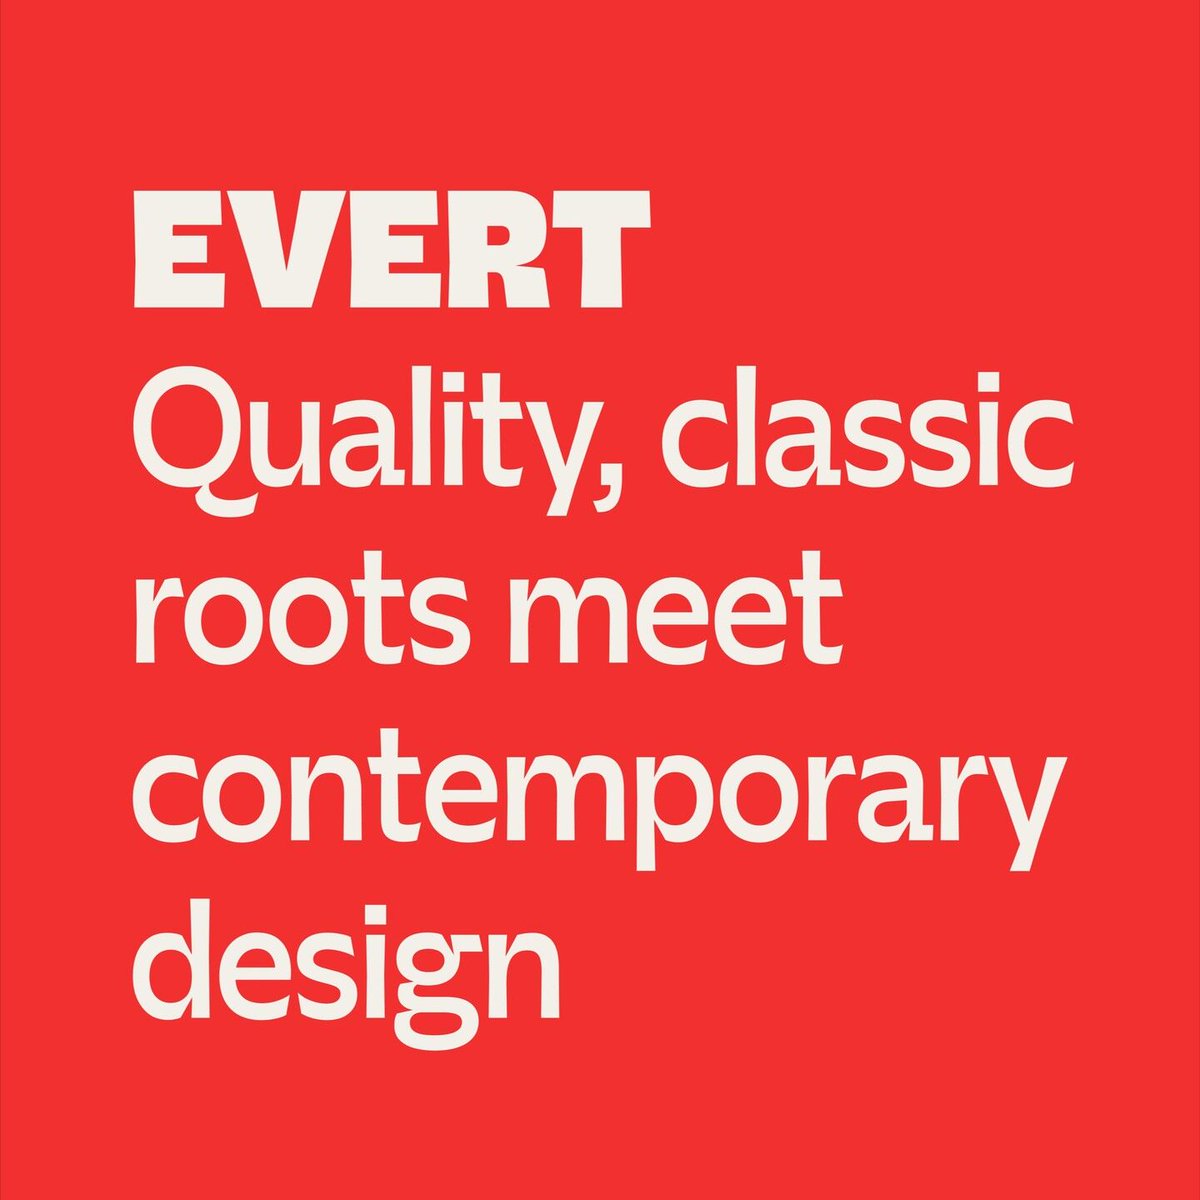 Evert is an accomplished and versatile new sans serif family from Foundry5. Classic enough for everyday designs, yet with enough character to make your designs stand out from the crowd. fonts.ilovetypography.com/fonts/foundry5…